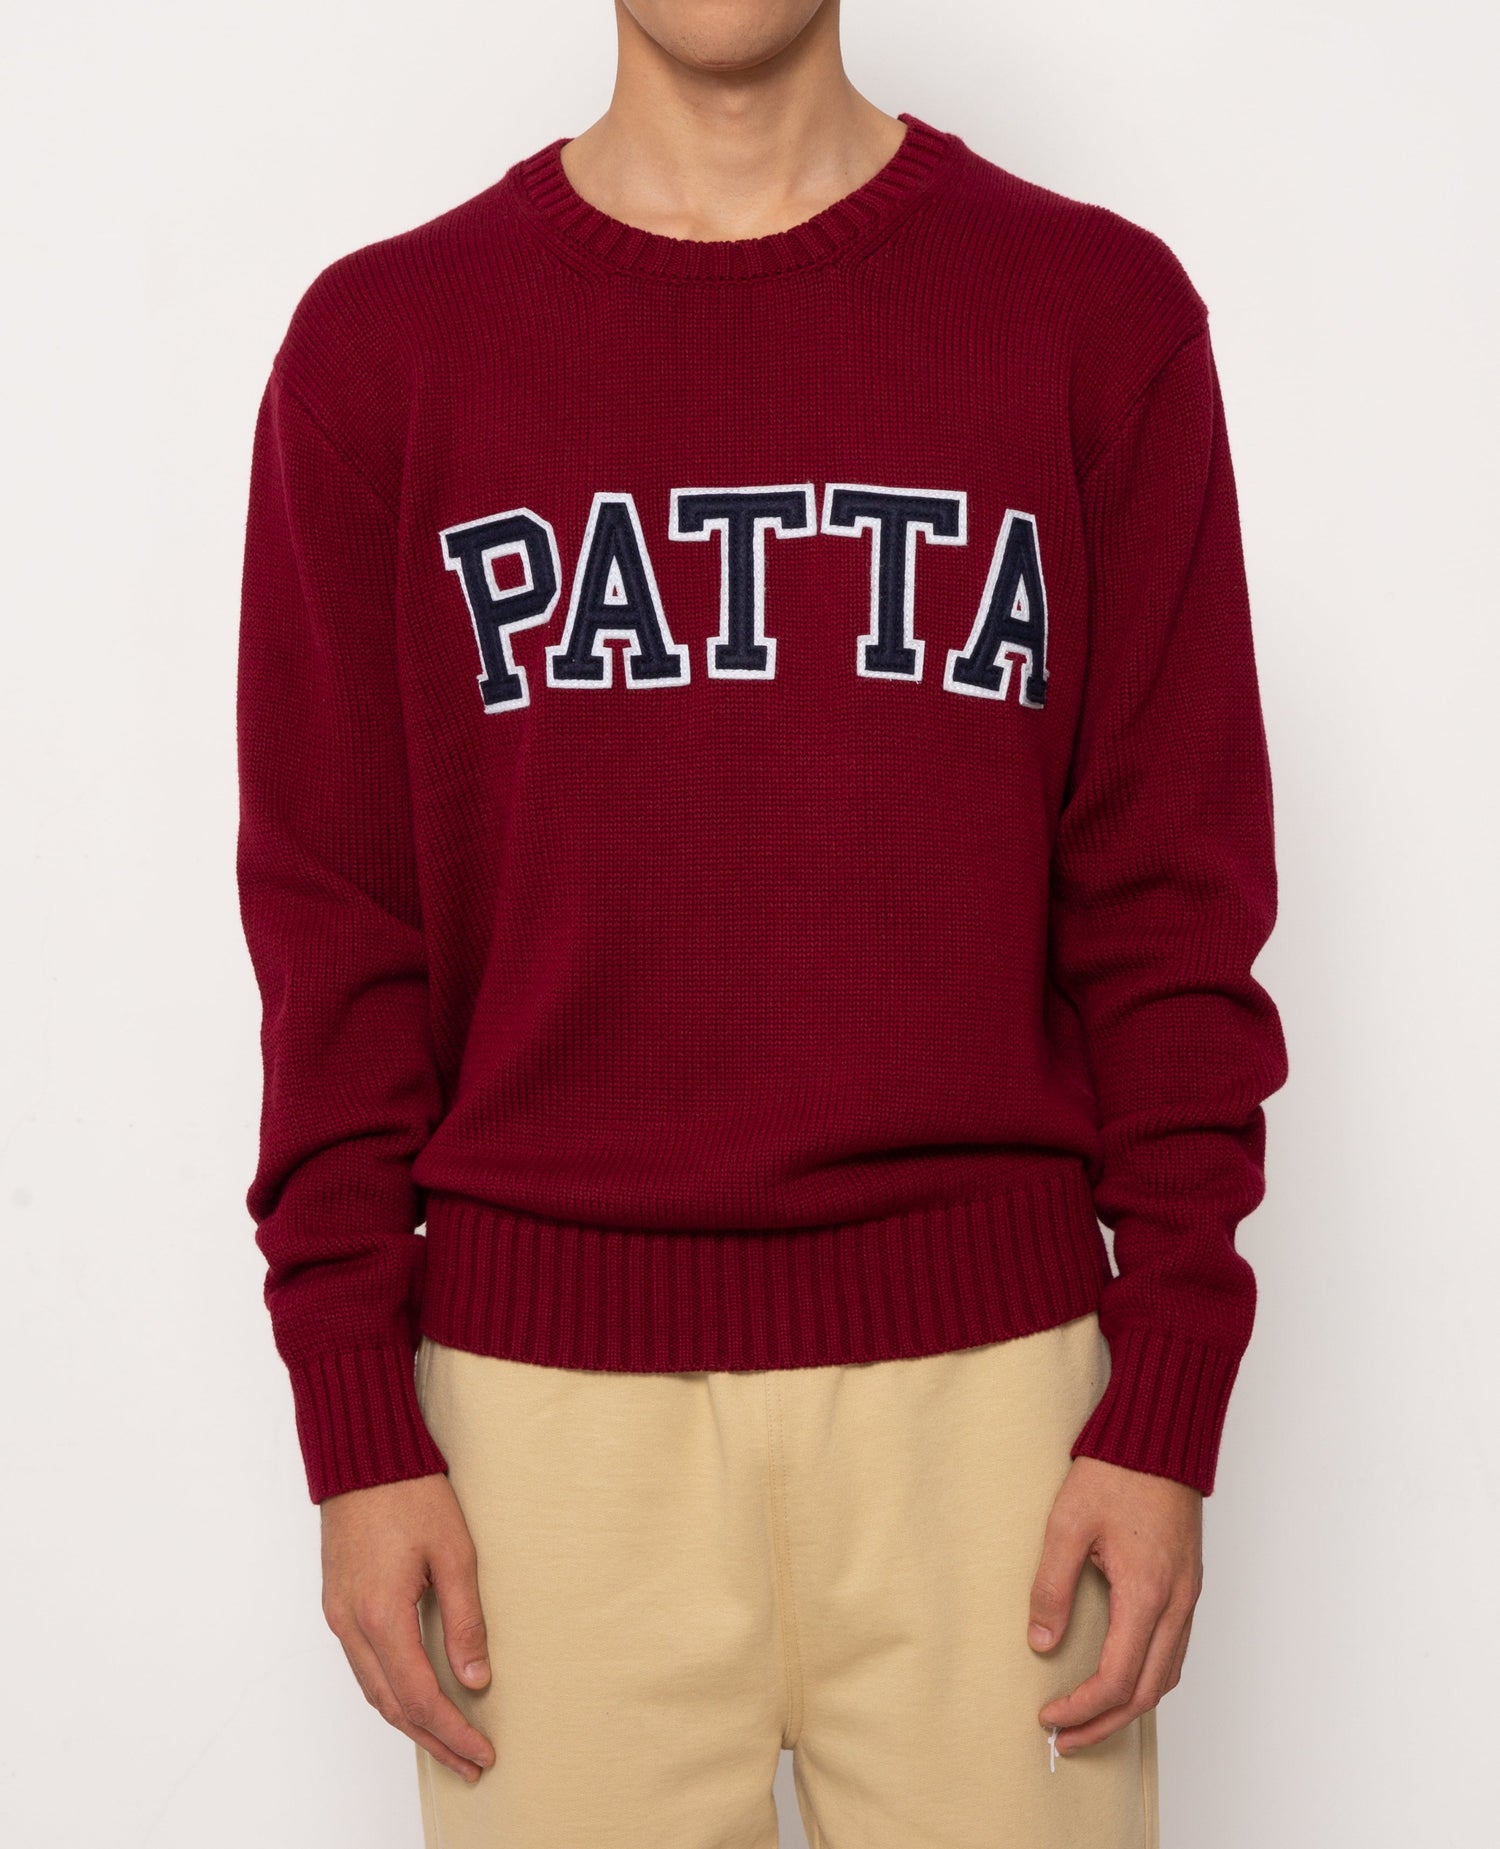 Patta University Knitted Sweater (Oxblood Red)